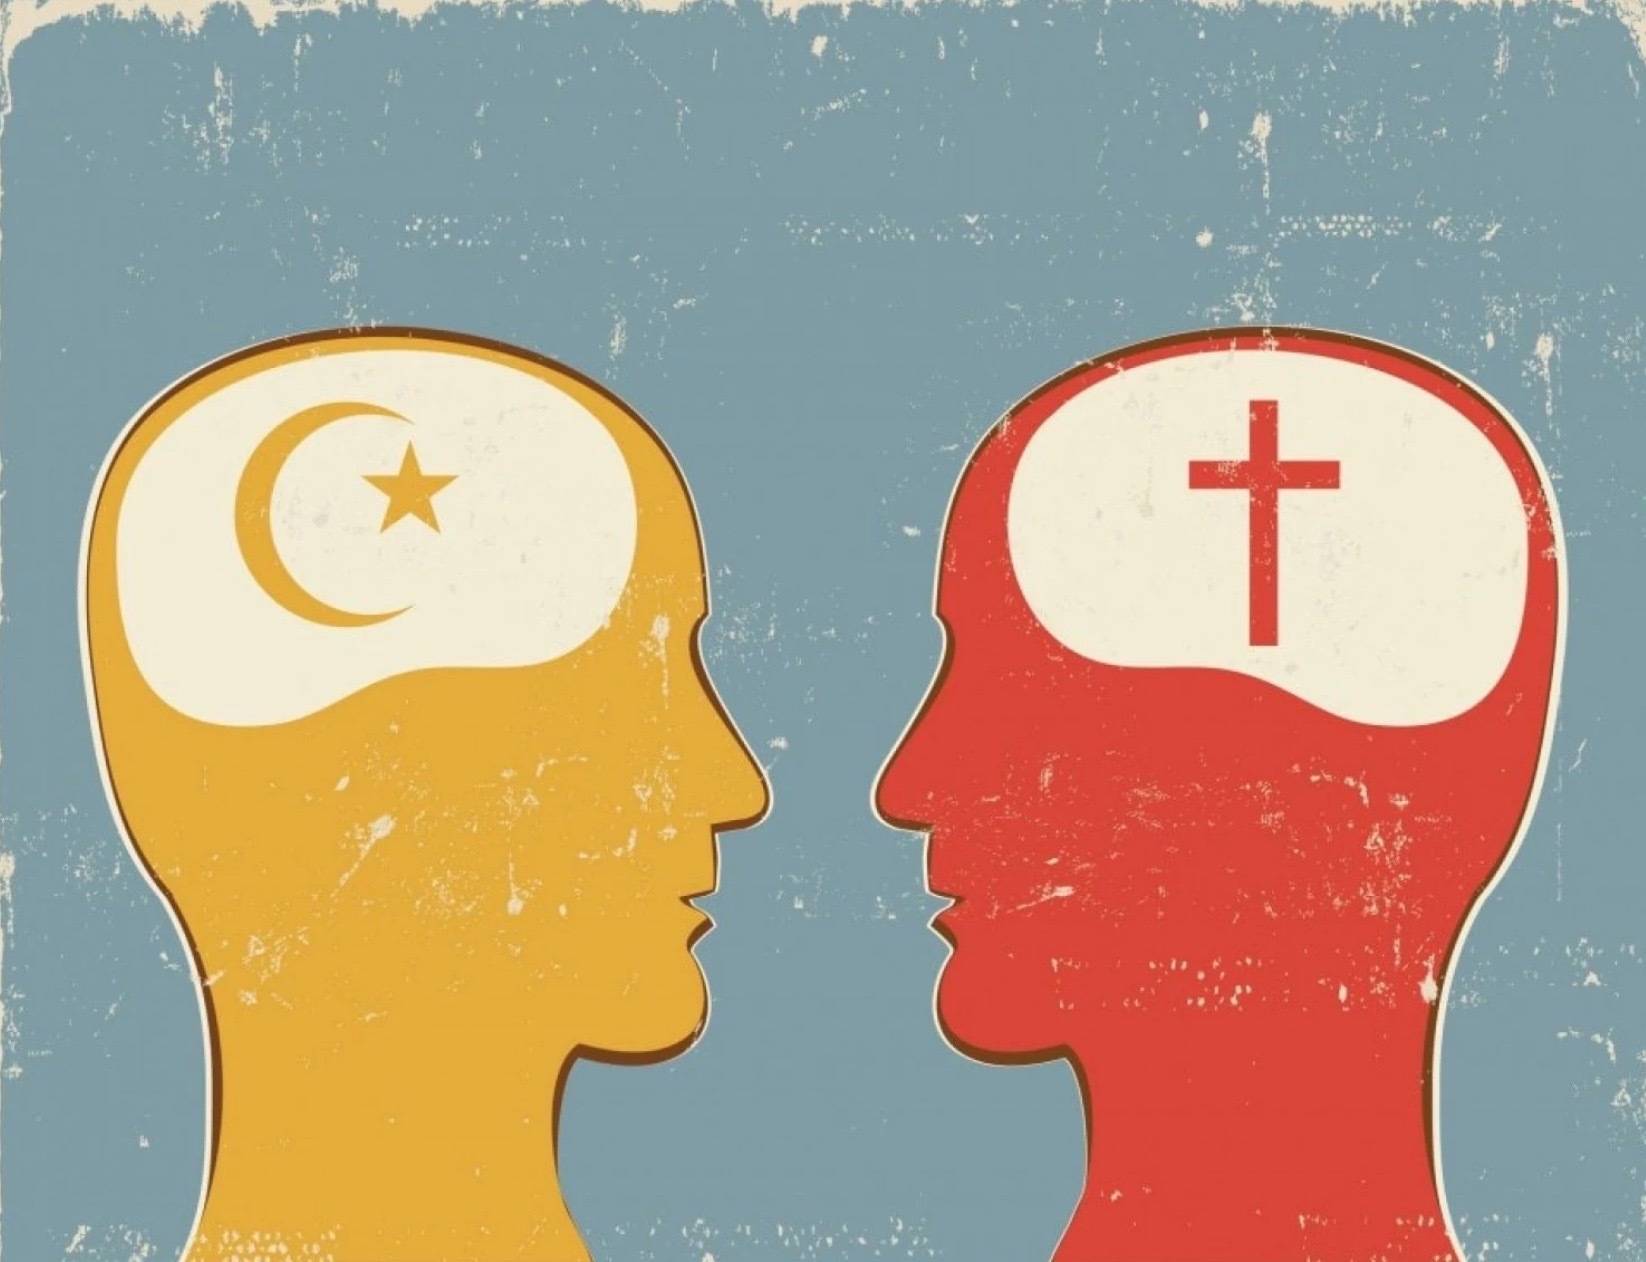 Muslims Like Me Don’t Have Theological Beef With Evangelicals. It’s The Prejudice Against Us That’s The Problem.